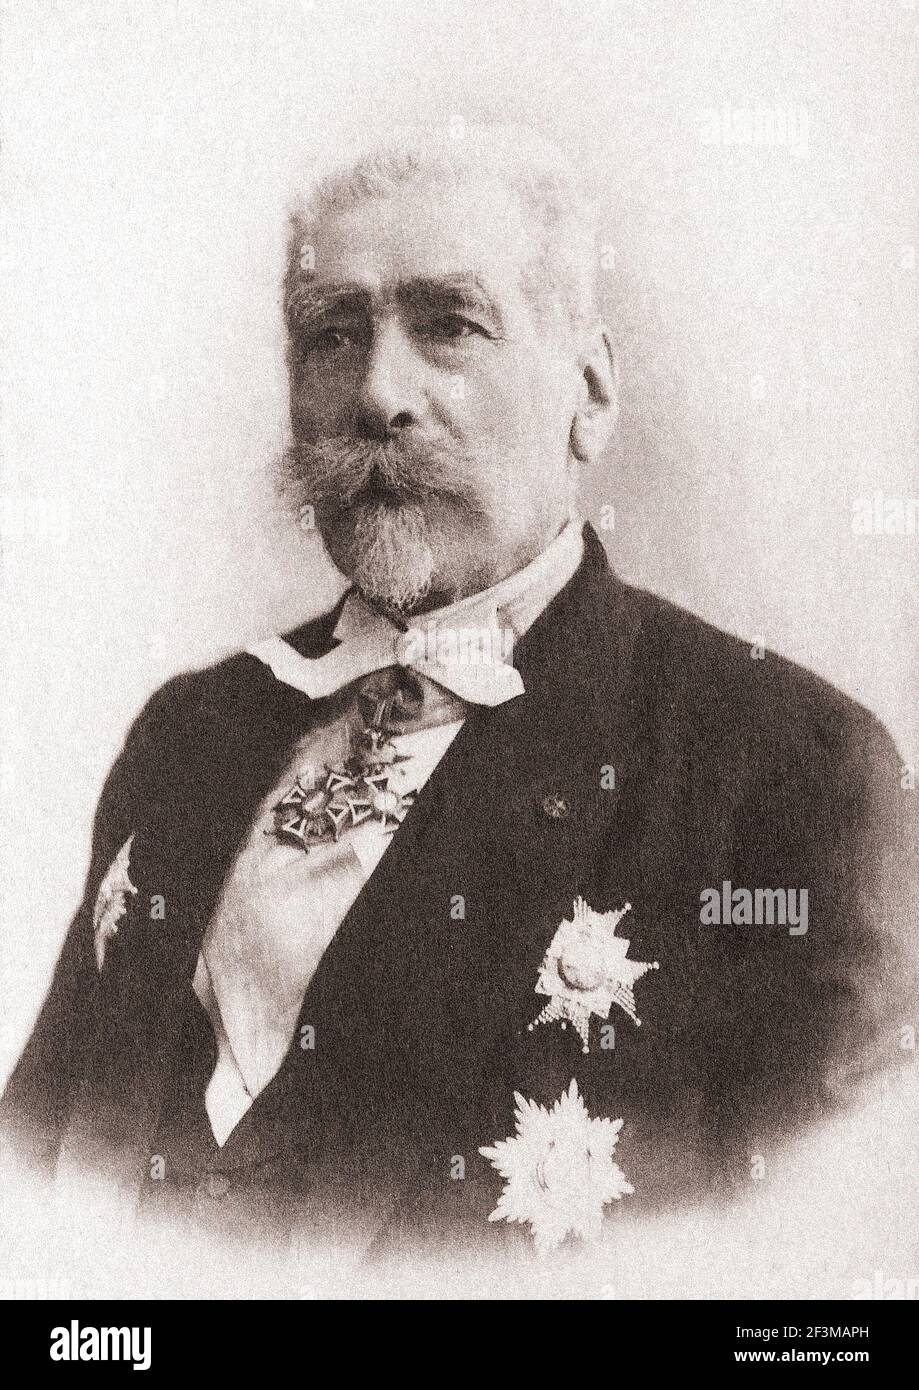 Francois Claude comte du Barail (1820 – 1902) was a major general, and French Minister of War under the presidency of Marshal MacMahon.  During the Fr Stock Photo